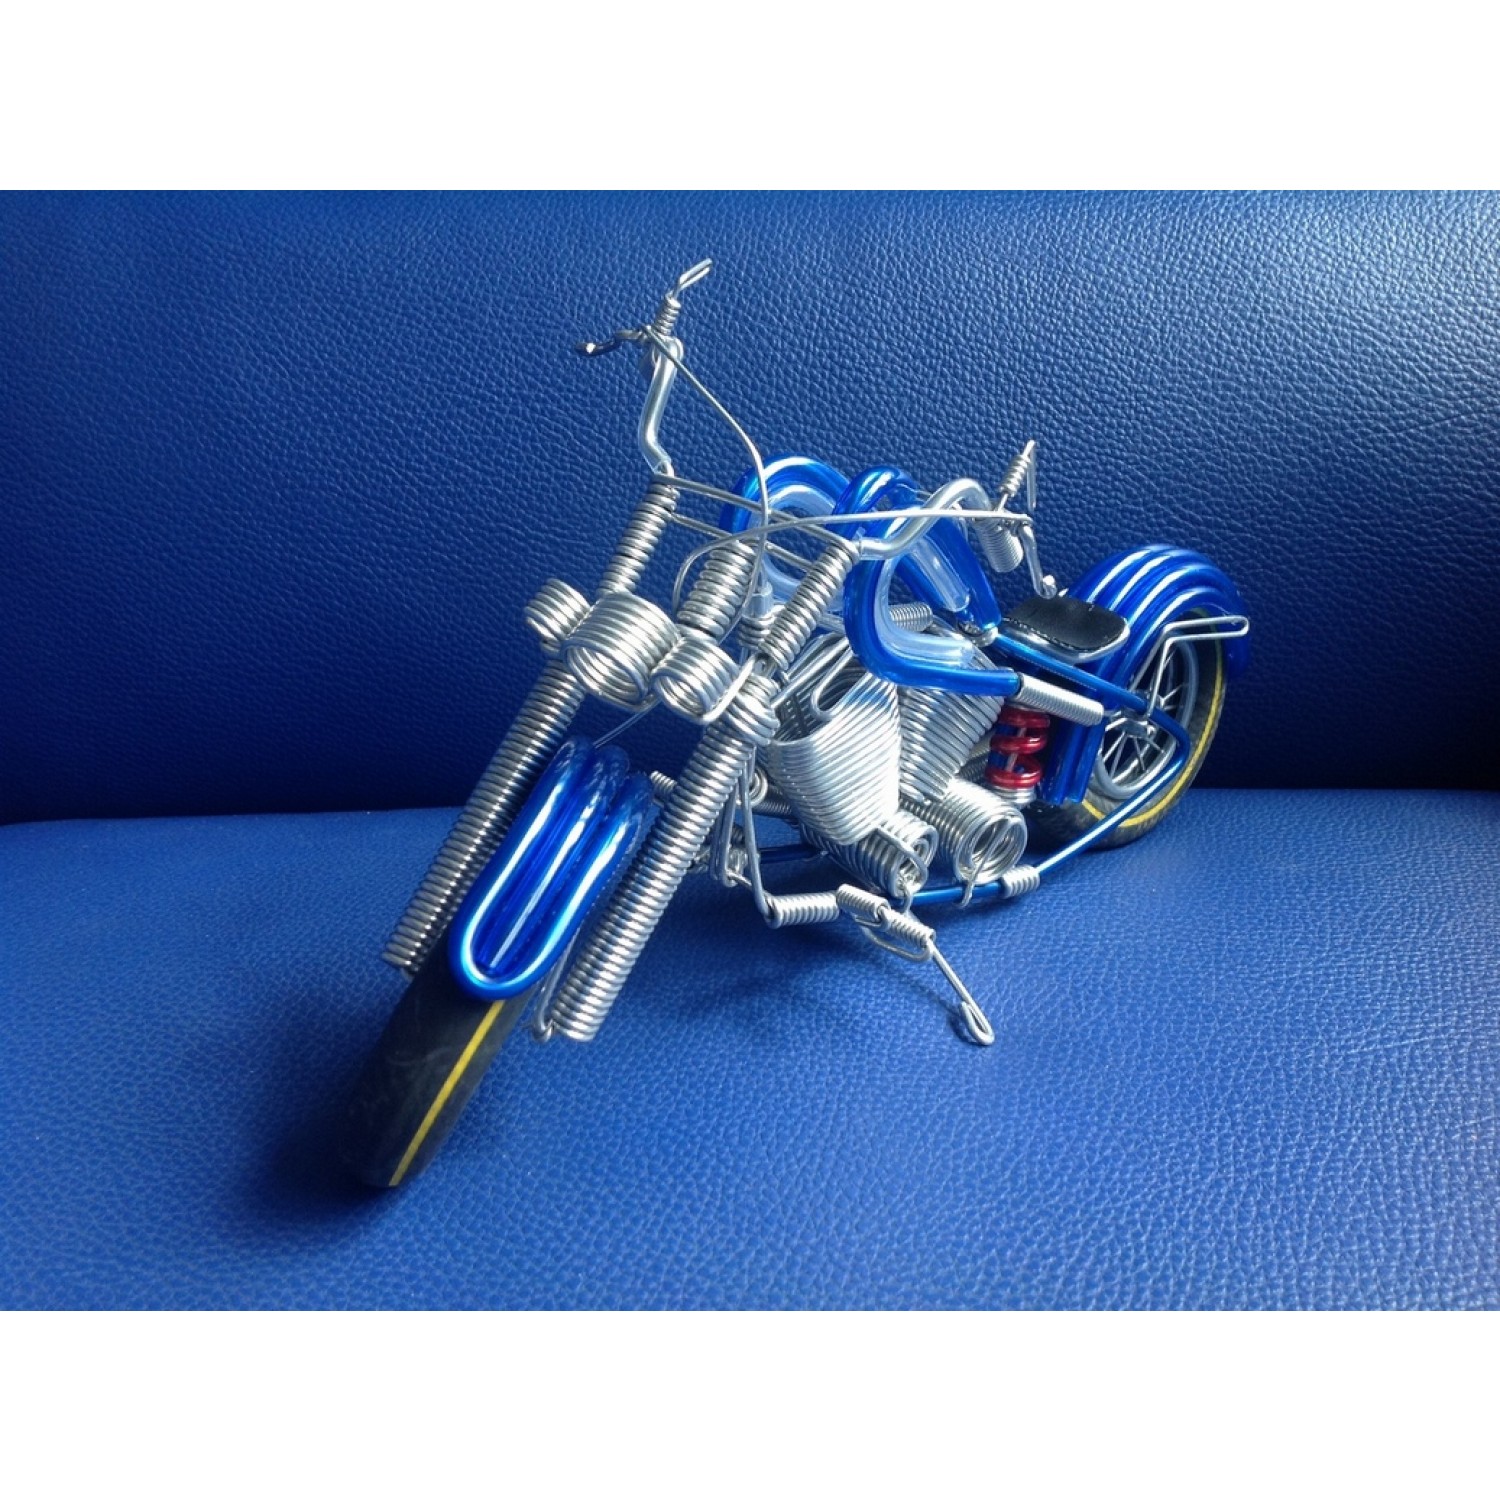 Handmade metal motorcycle enthusiast pen holder Father's Gift 